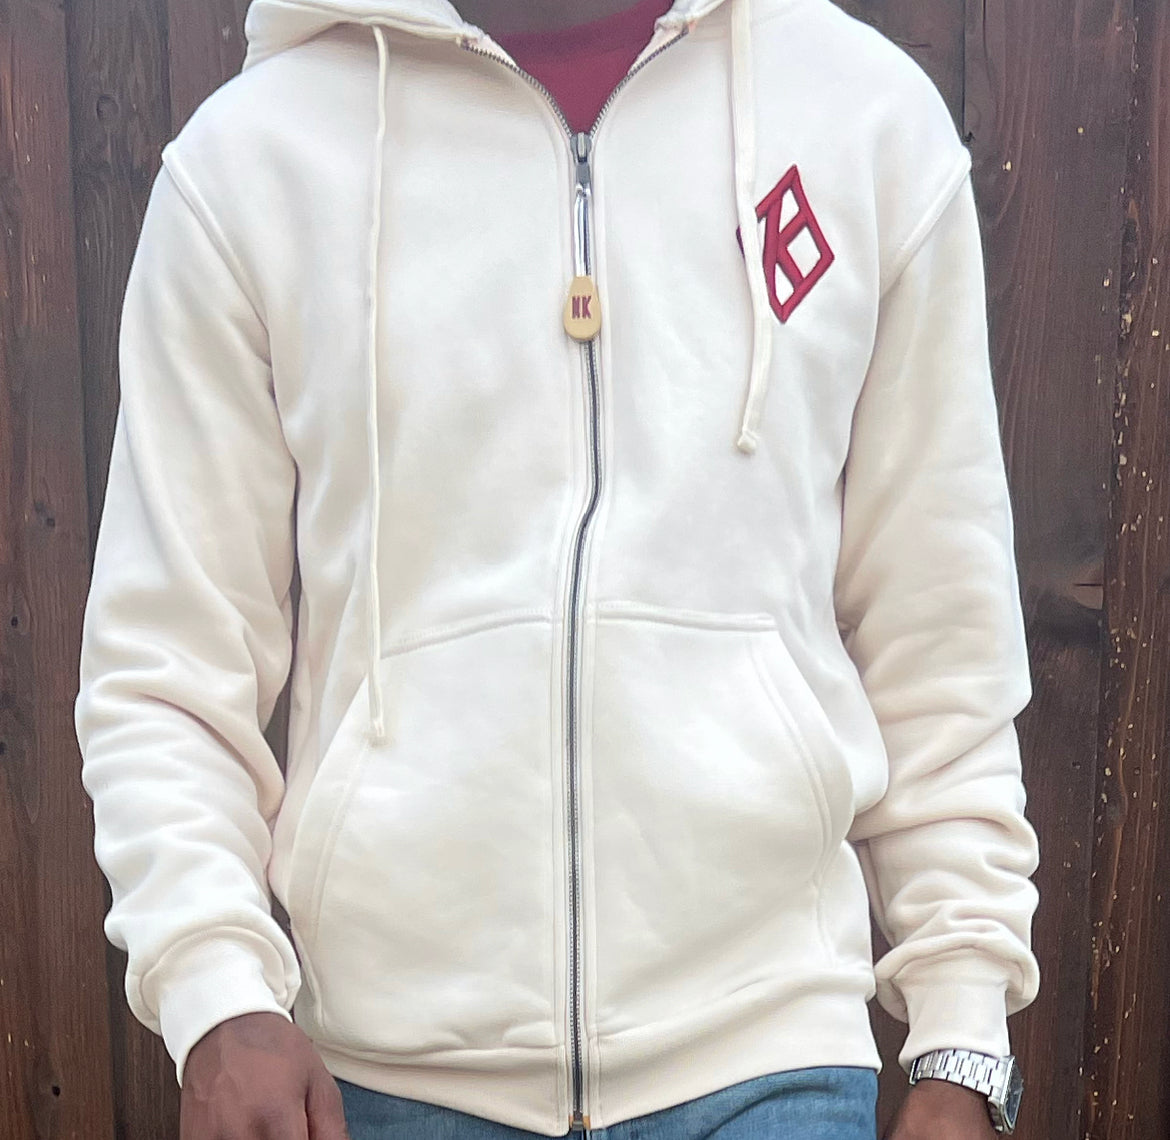 Introducing the Kappa alpha psi Floating K 3D Classic Hoodie, perfect for men who want to add some style to their active-wear collection. This hoodie is made by the popular brand Nupe Kave and is designed for ultimate comfort and durability. It features a 3D floating K design that makes it stand out from other hoodies.